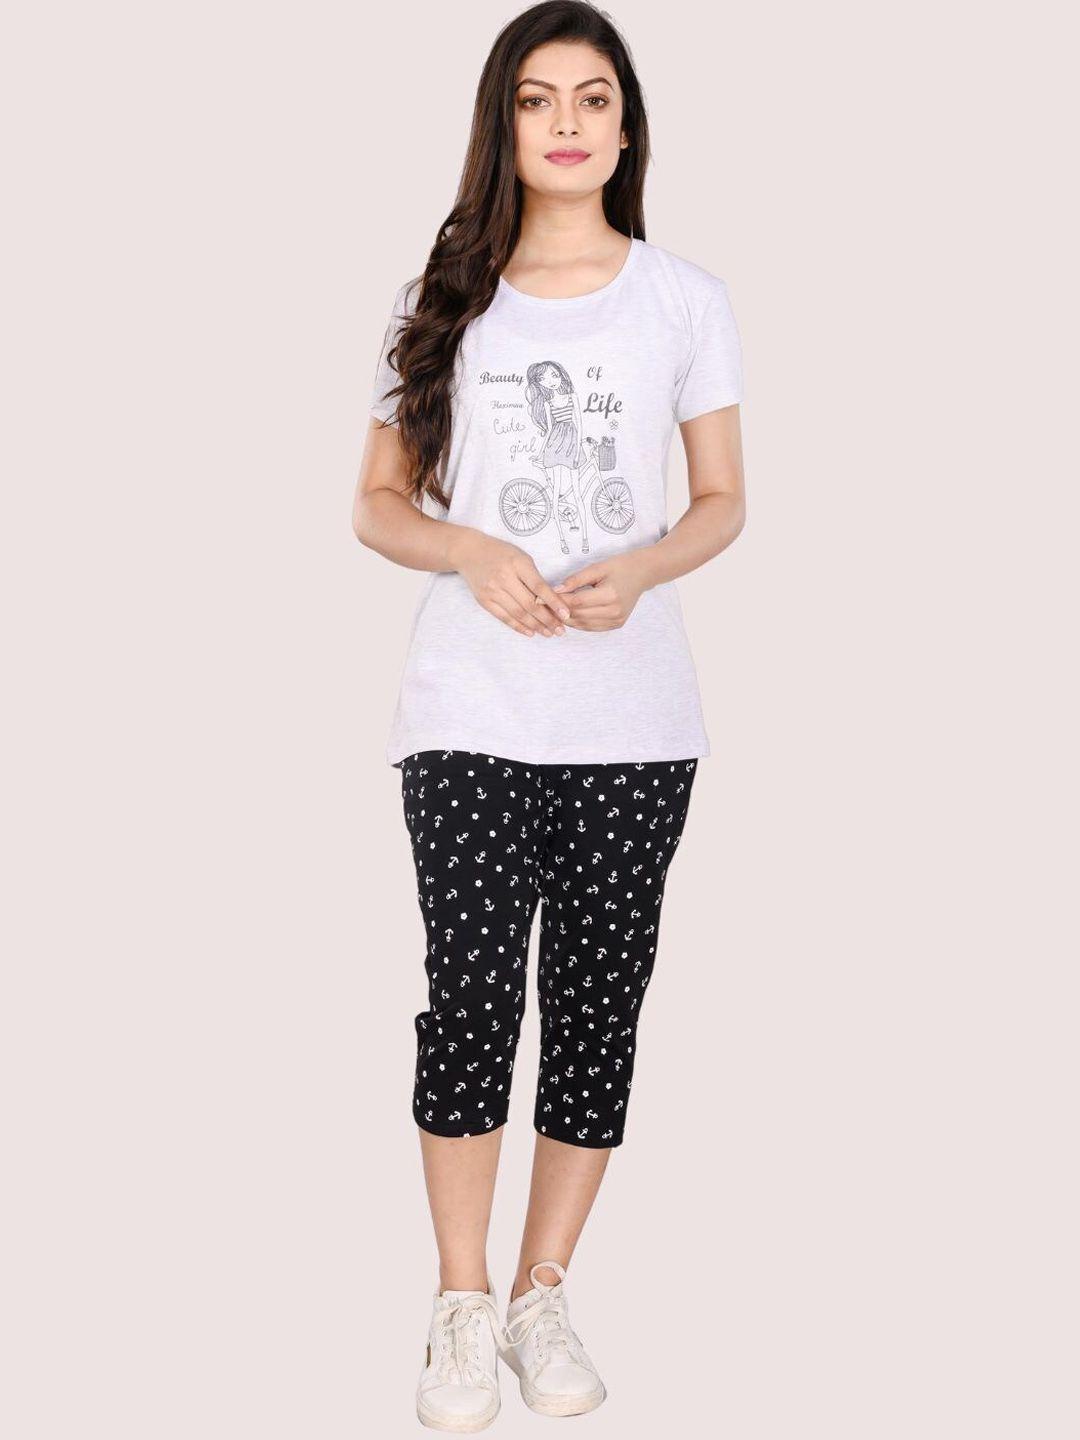 styleaone printed cotton t-shirt & capris set